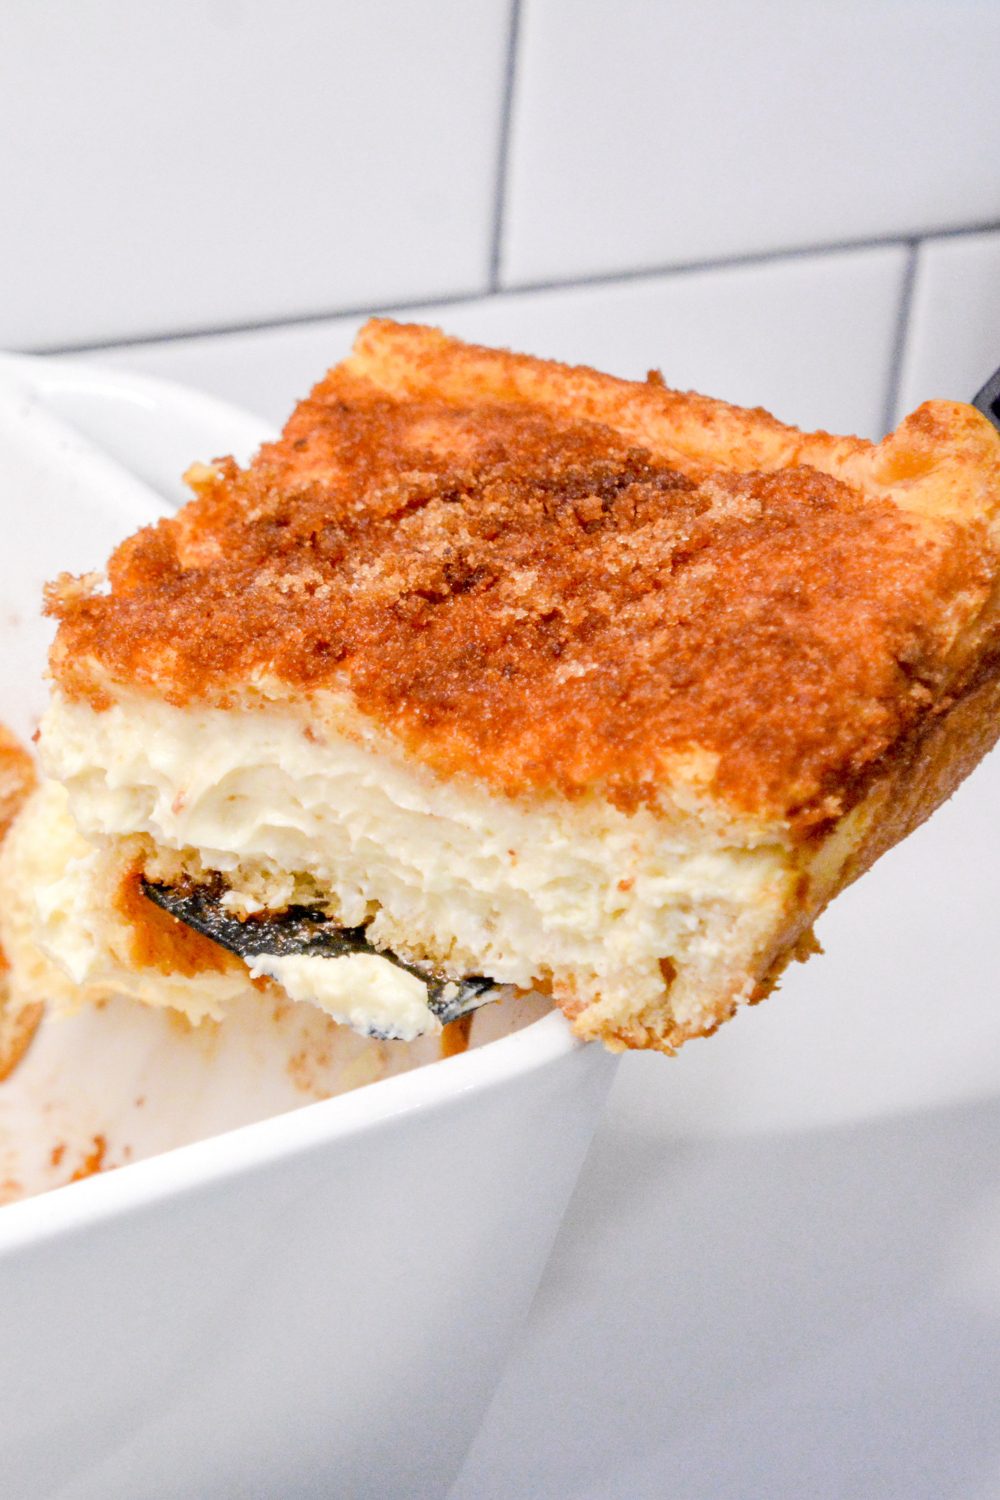 Snickerdoodle cookies and cheesecake combine for these snickerdoodle cheesecake bars made with a double crust of crescent rolls for yummy cinnamon cream cheese bars.